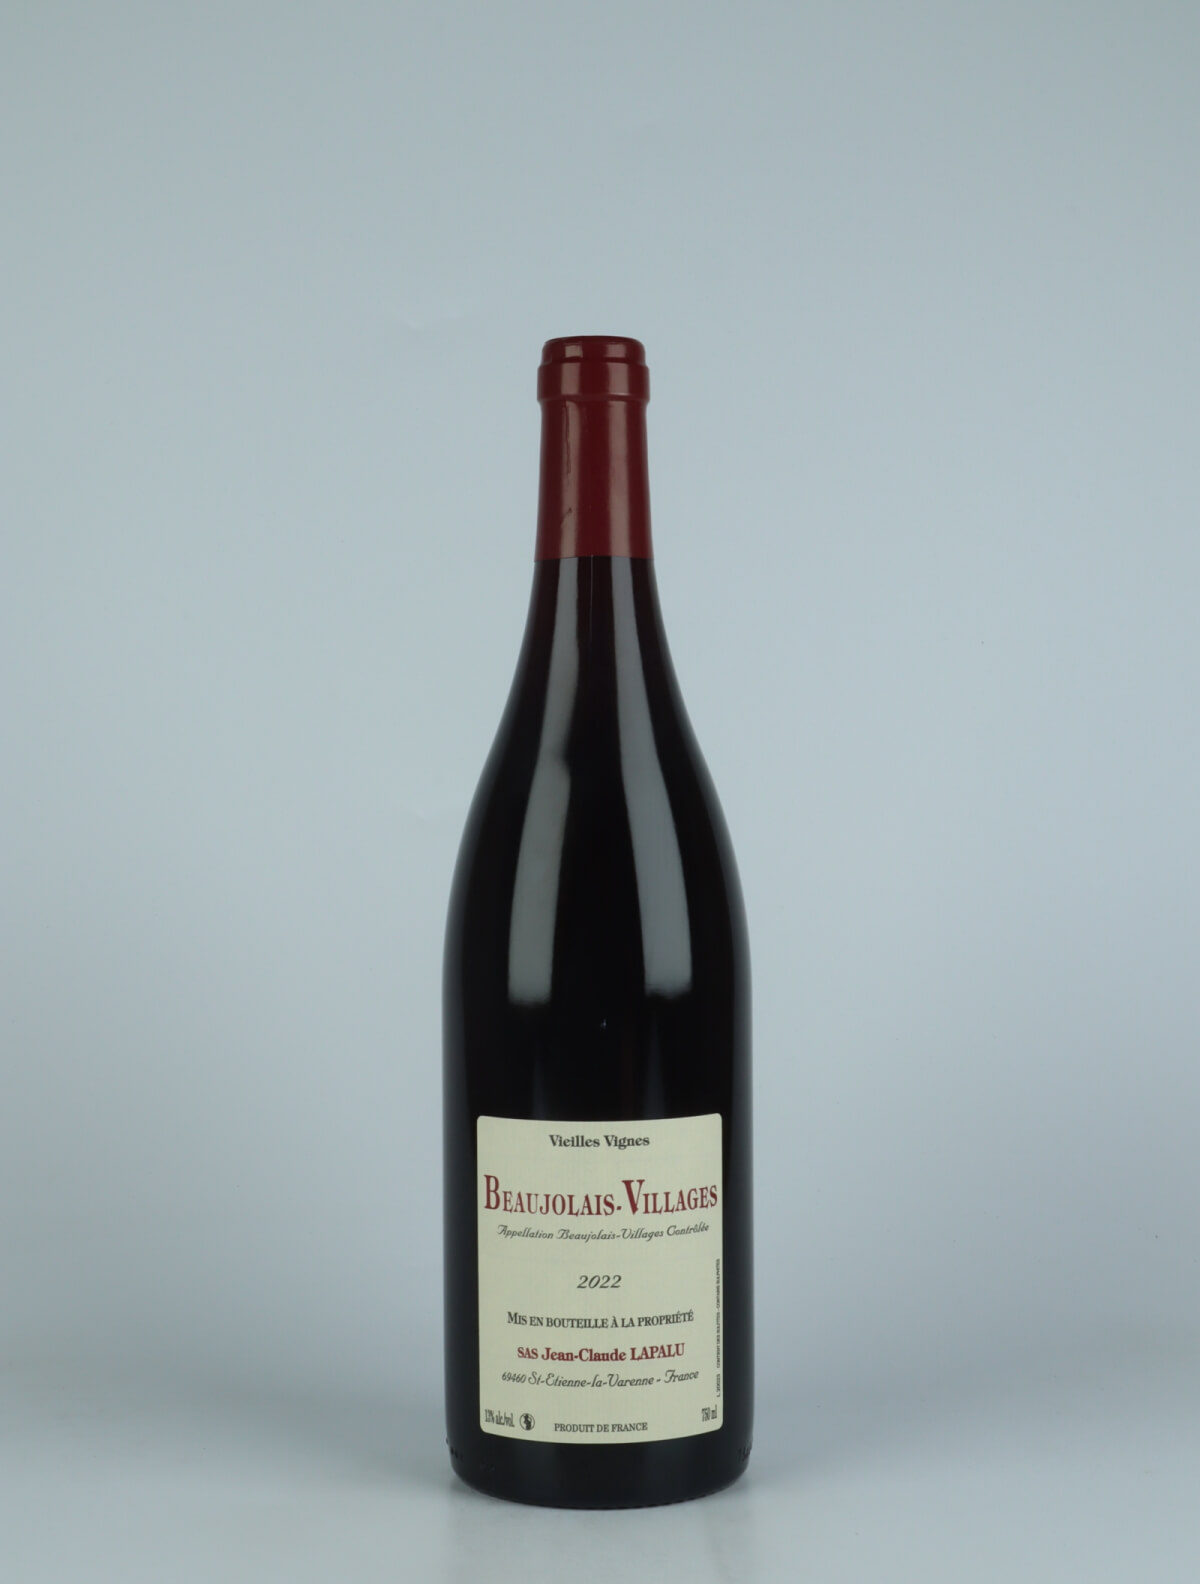 A bottle 2022 Beaujolais Villages - Vieilles Vignes Red wine from Jean-Claude Lapalu, Beaujolais in France